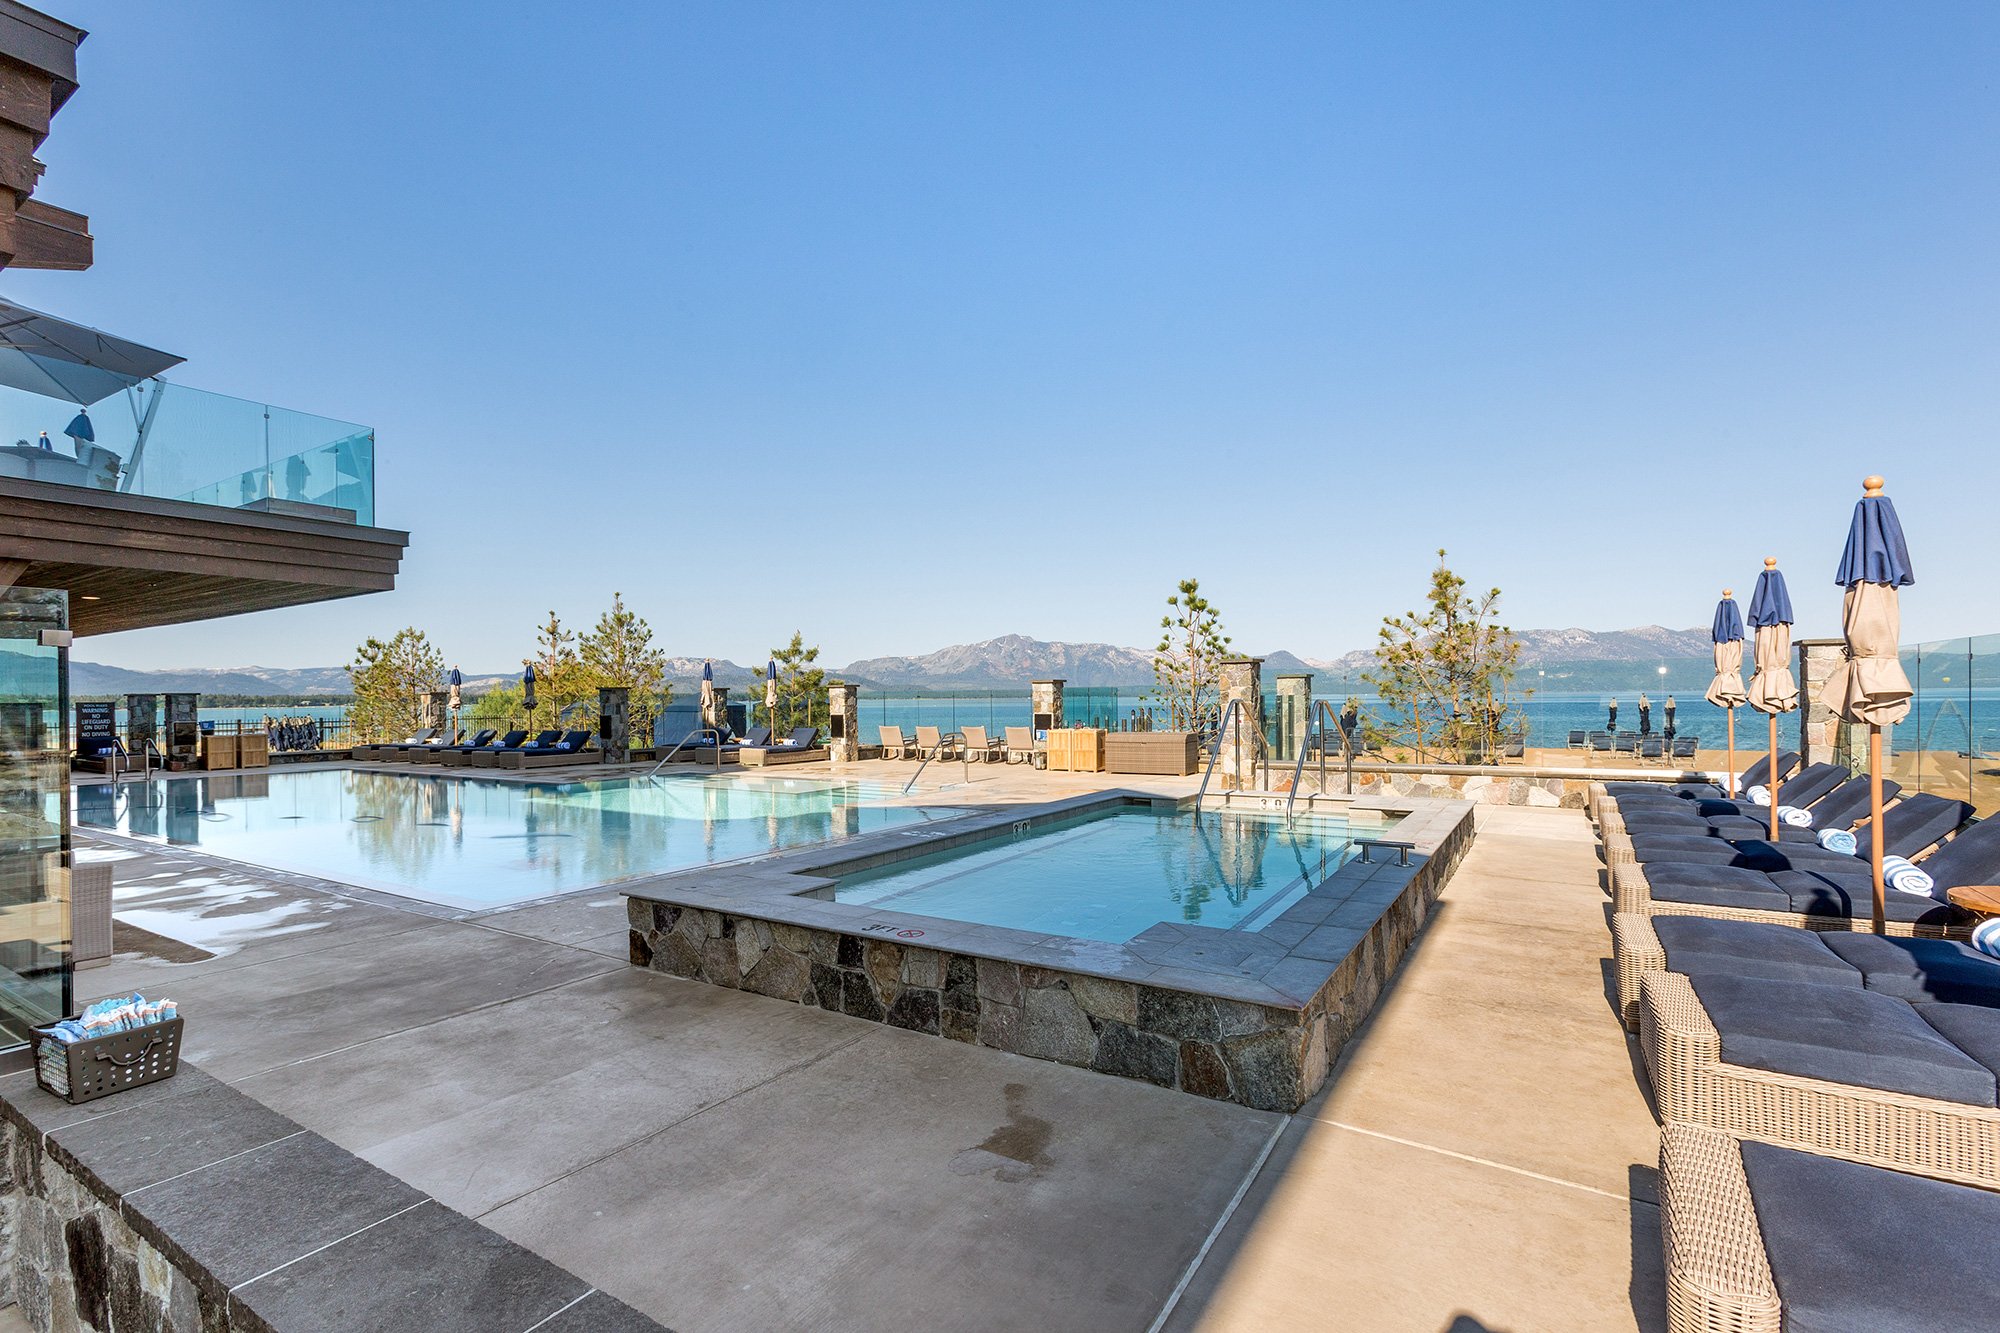 Relaxing pool area at the lakefront resort, showcasing a stunning view of serene Lake Tahoe and the surrounding Sierras.